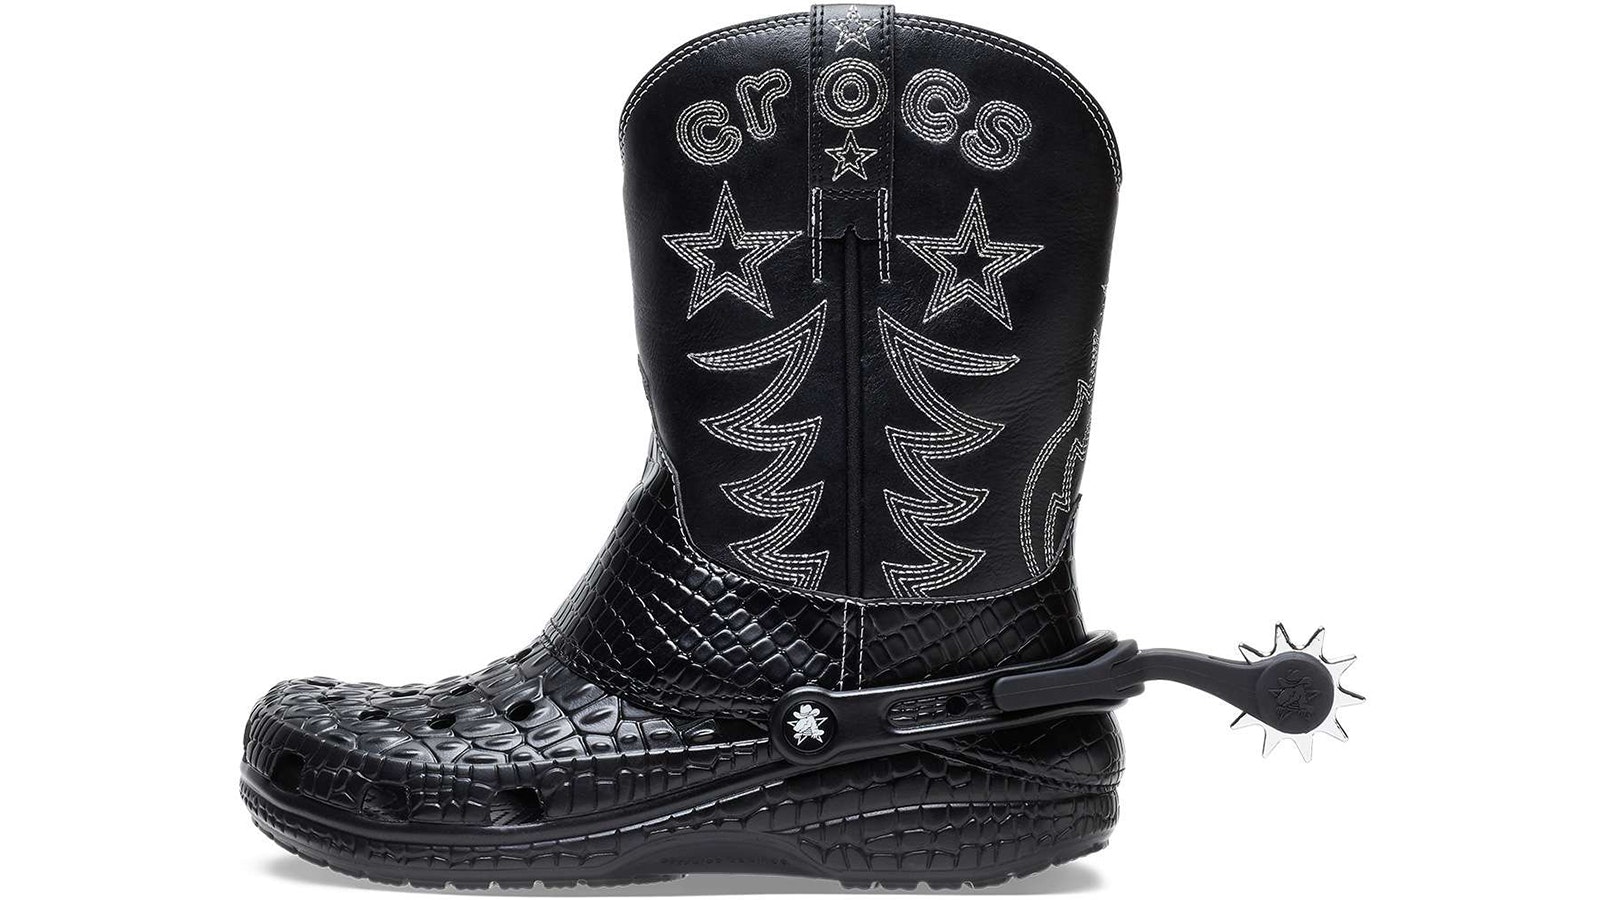 The Crocs cowboy boot comes with removable spurs.